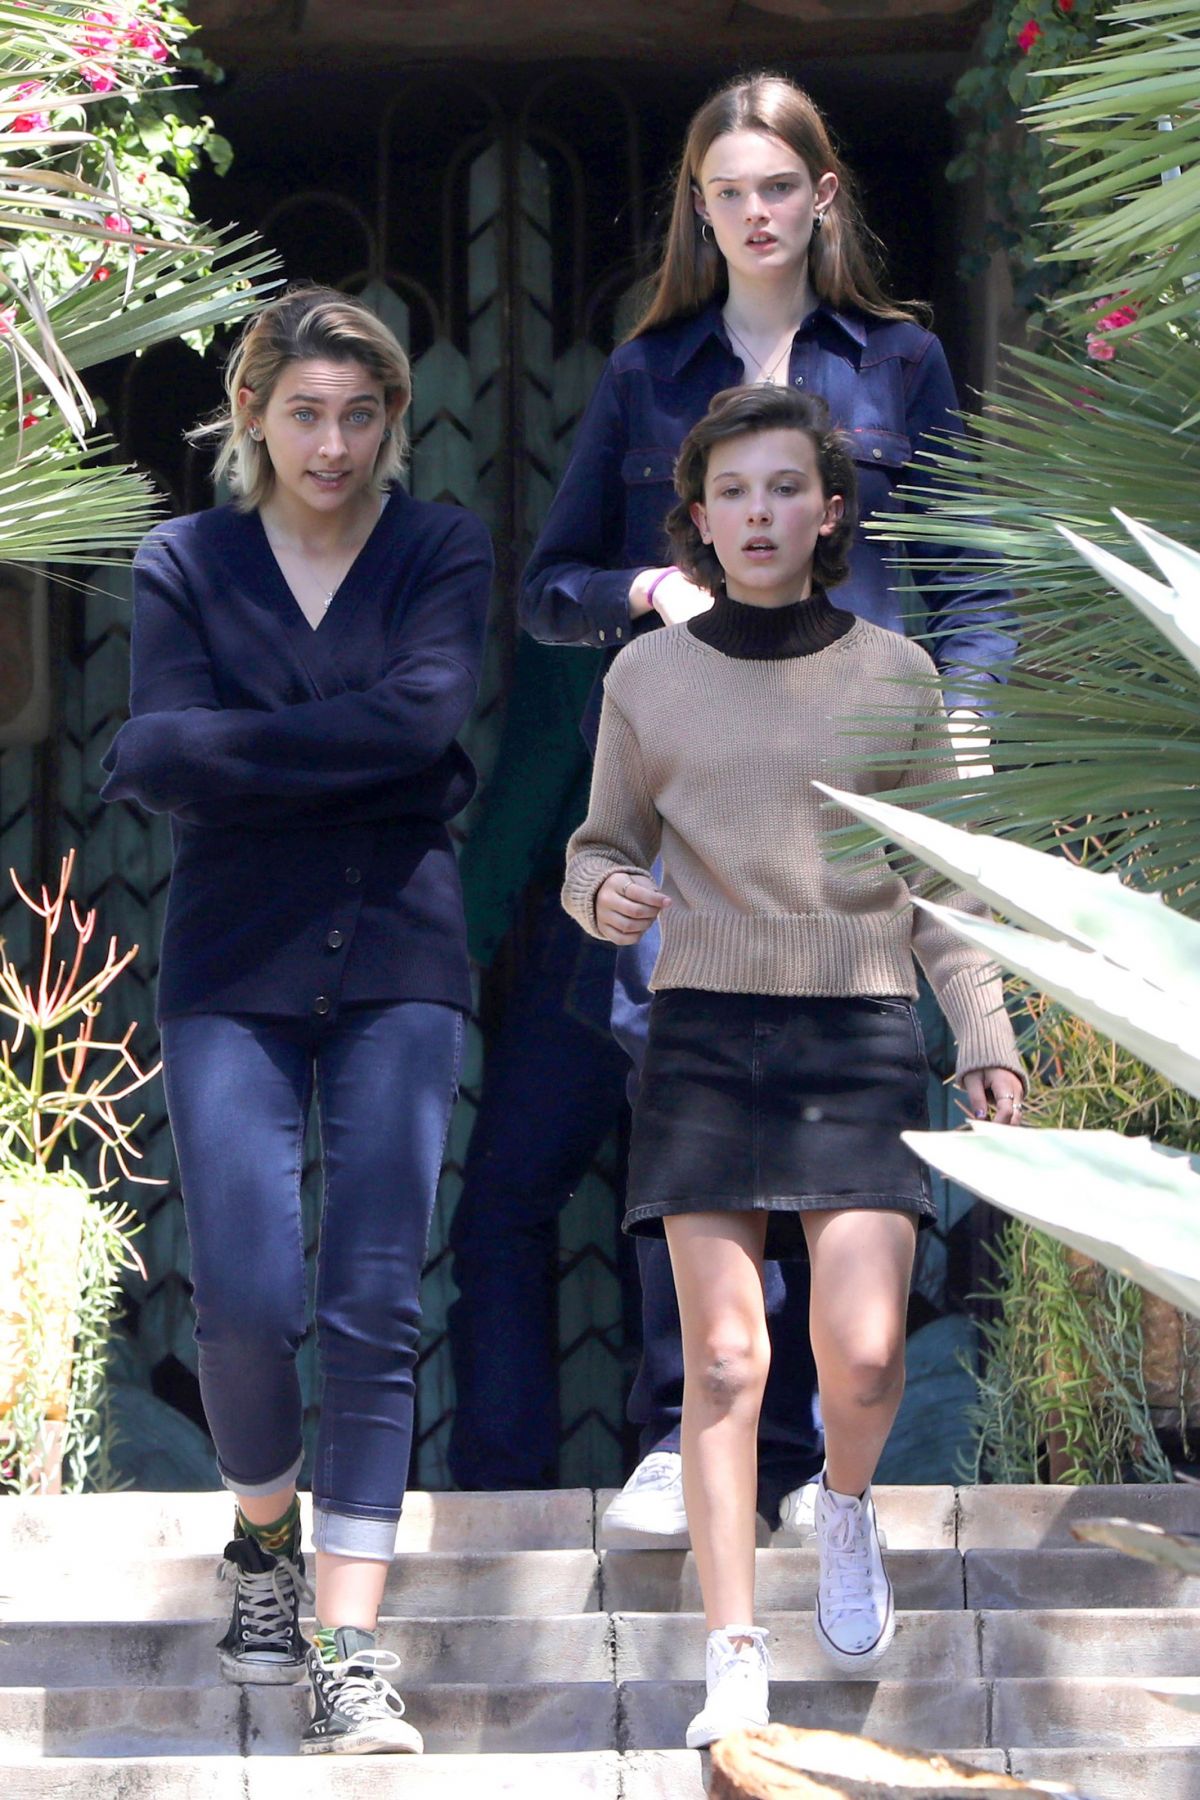 PARIS JACKSON and MILLIE BOBBY BROWN on the Set of Black Dhalia House in Los Angeles ...1200 x 1800